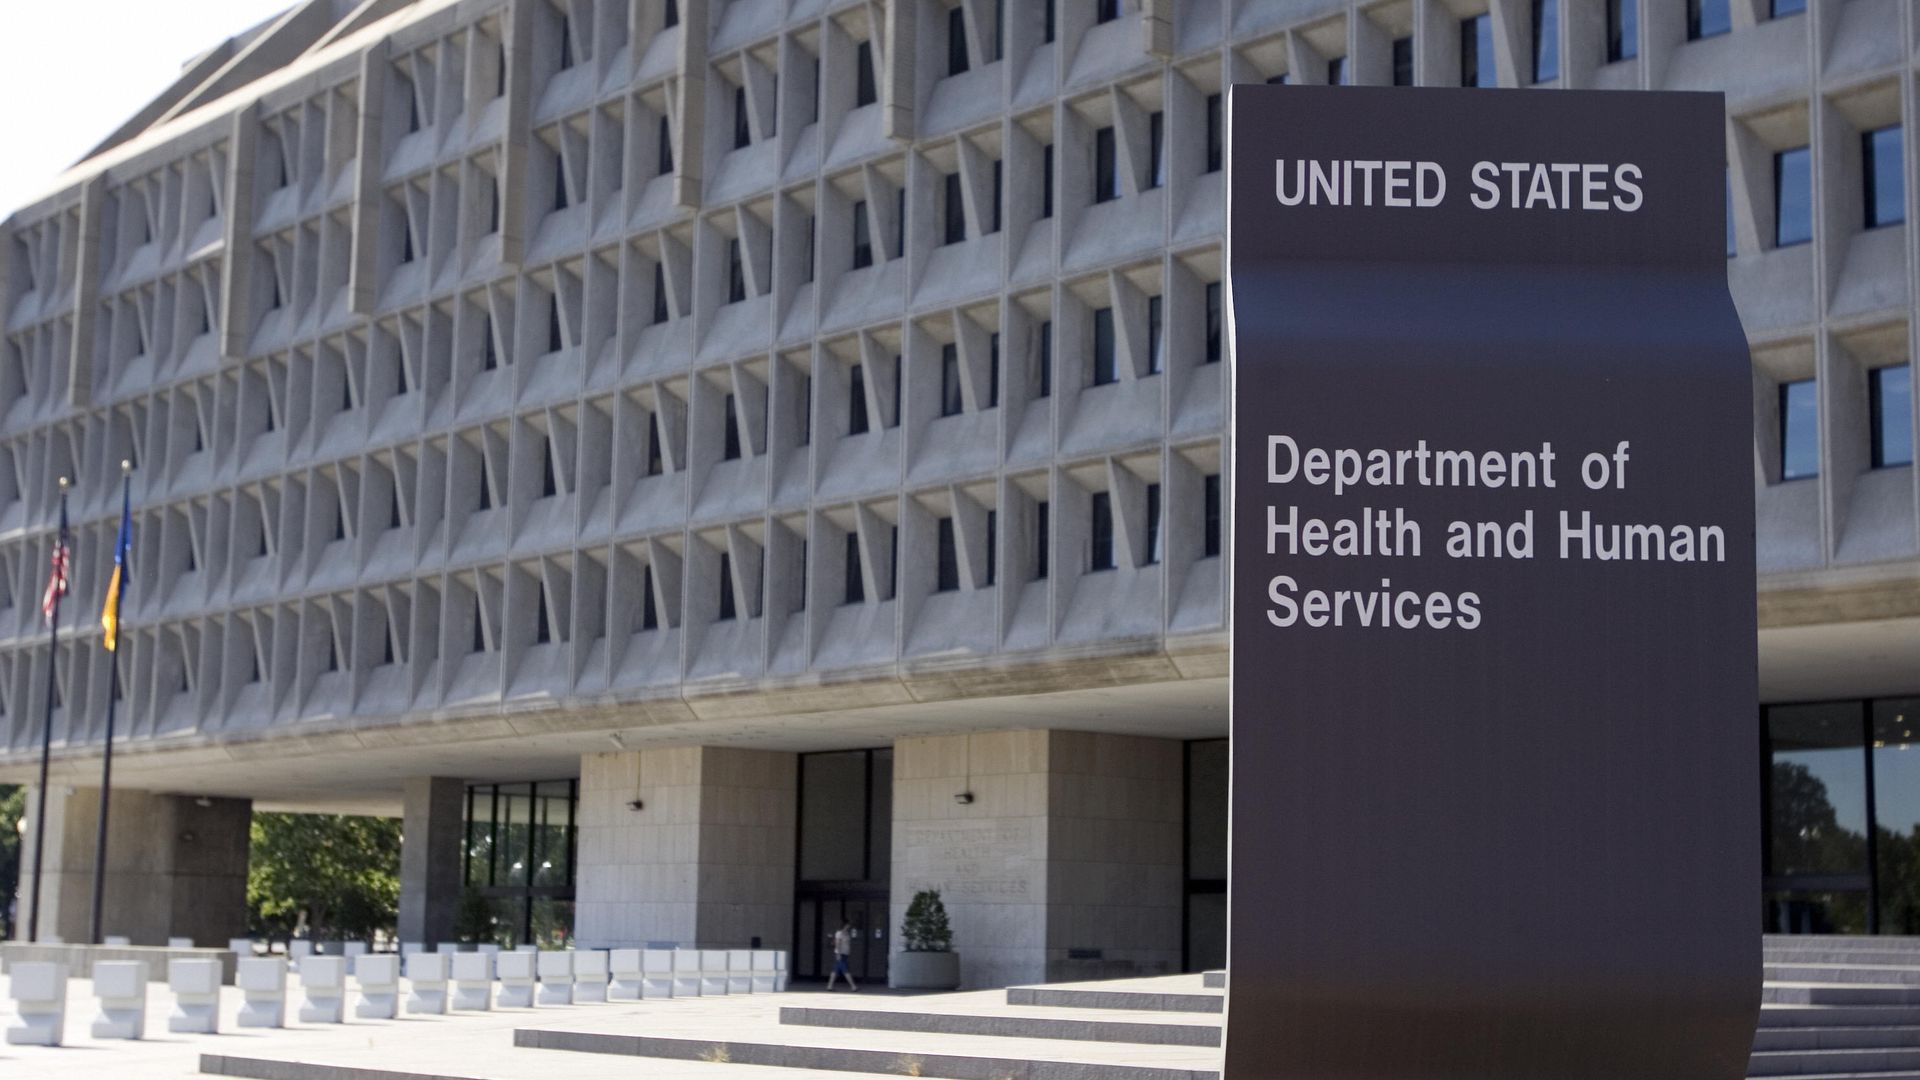 The US Department of Health and Human Services building